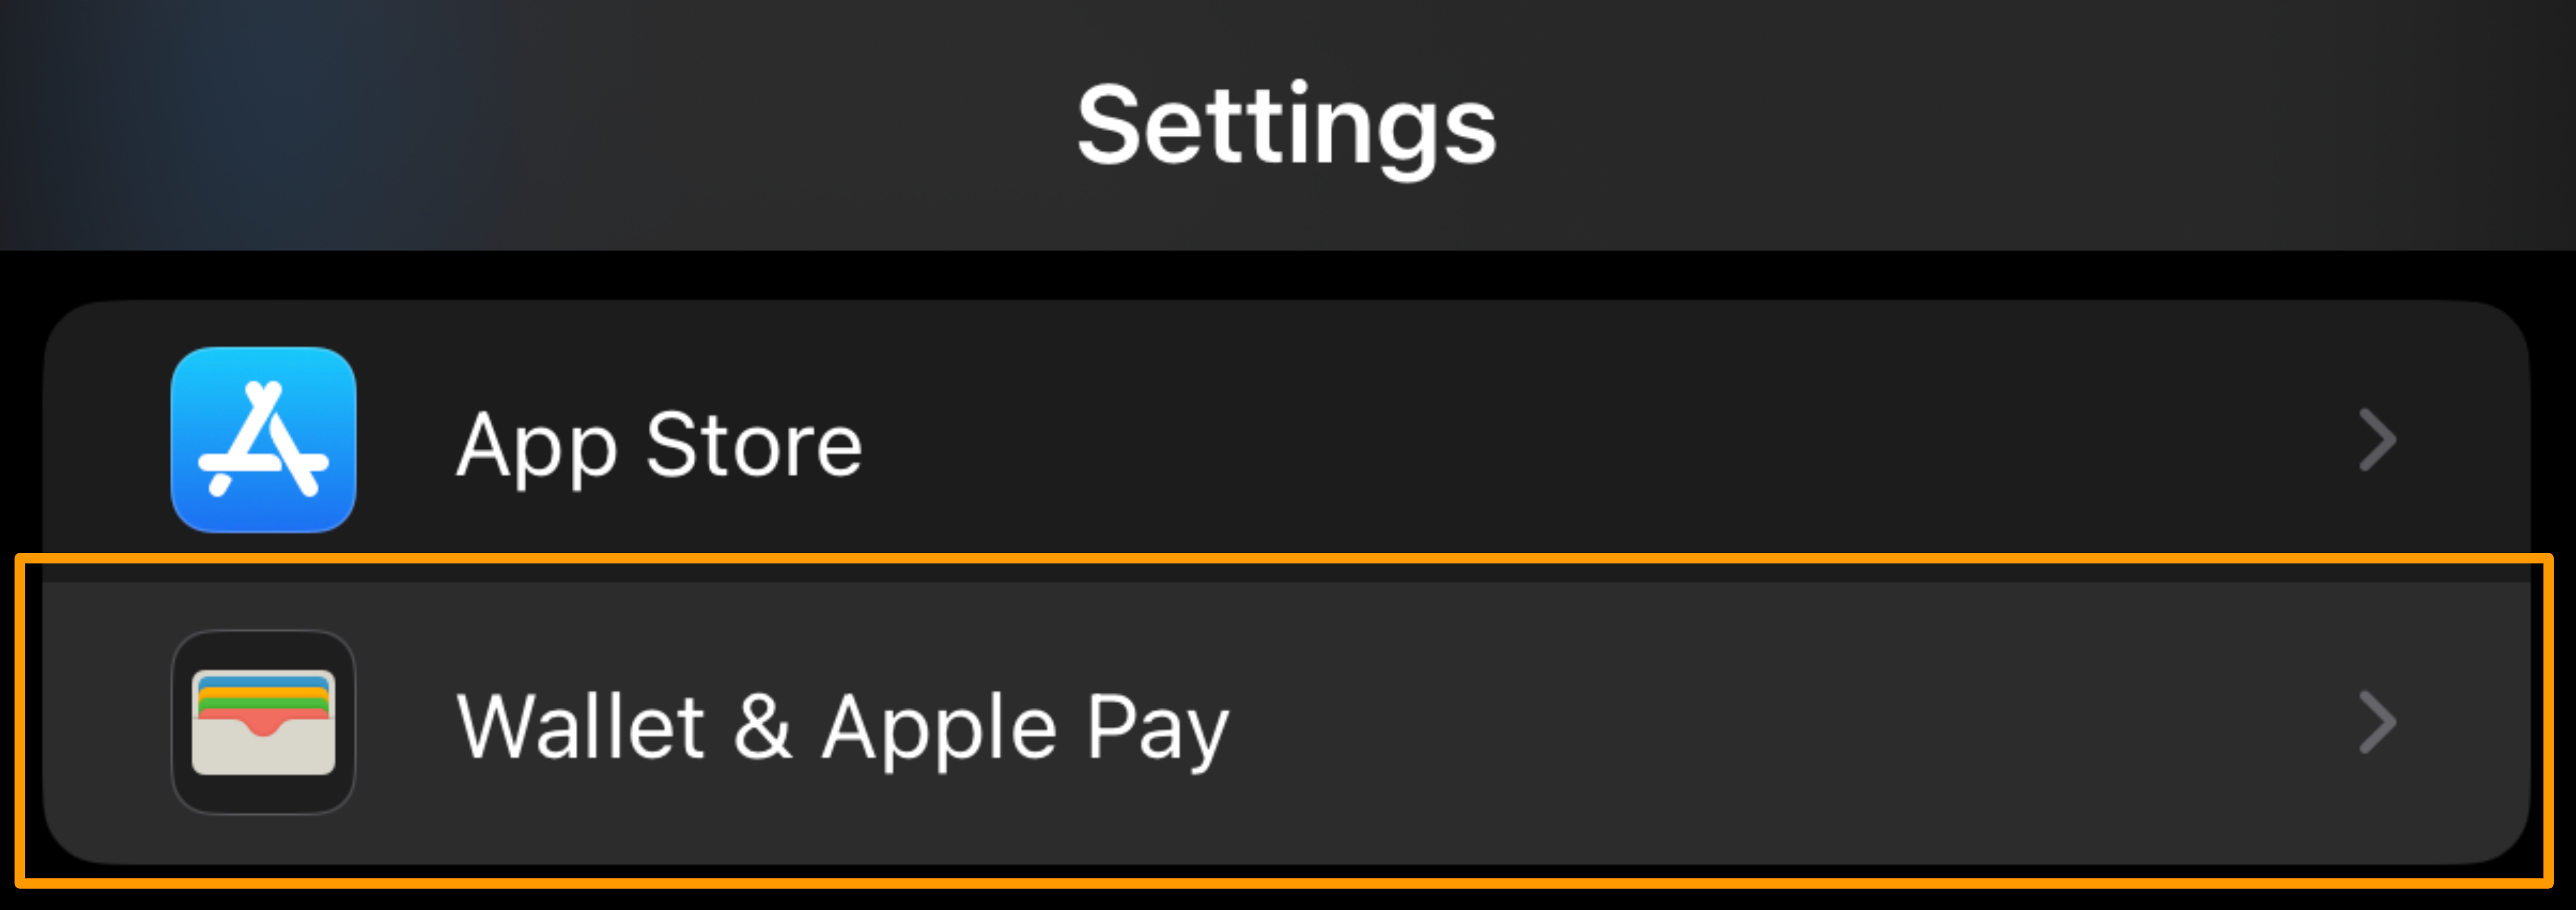 CS_Card_-_Apple_Pay_-_Wallet___Apple_Pay.png